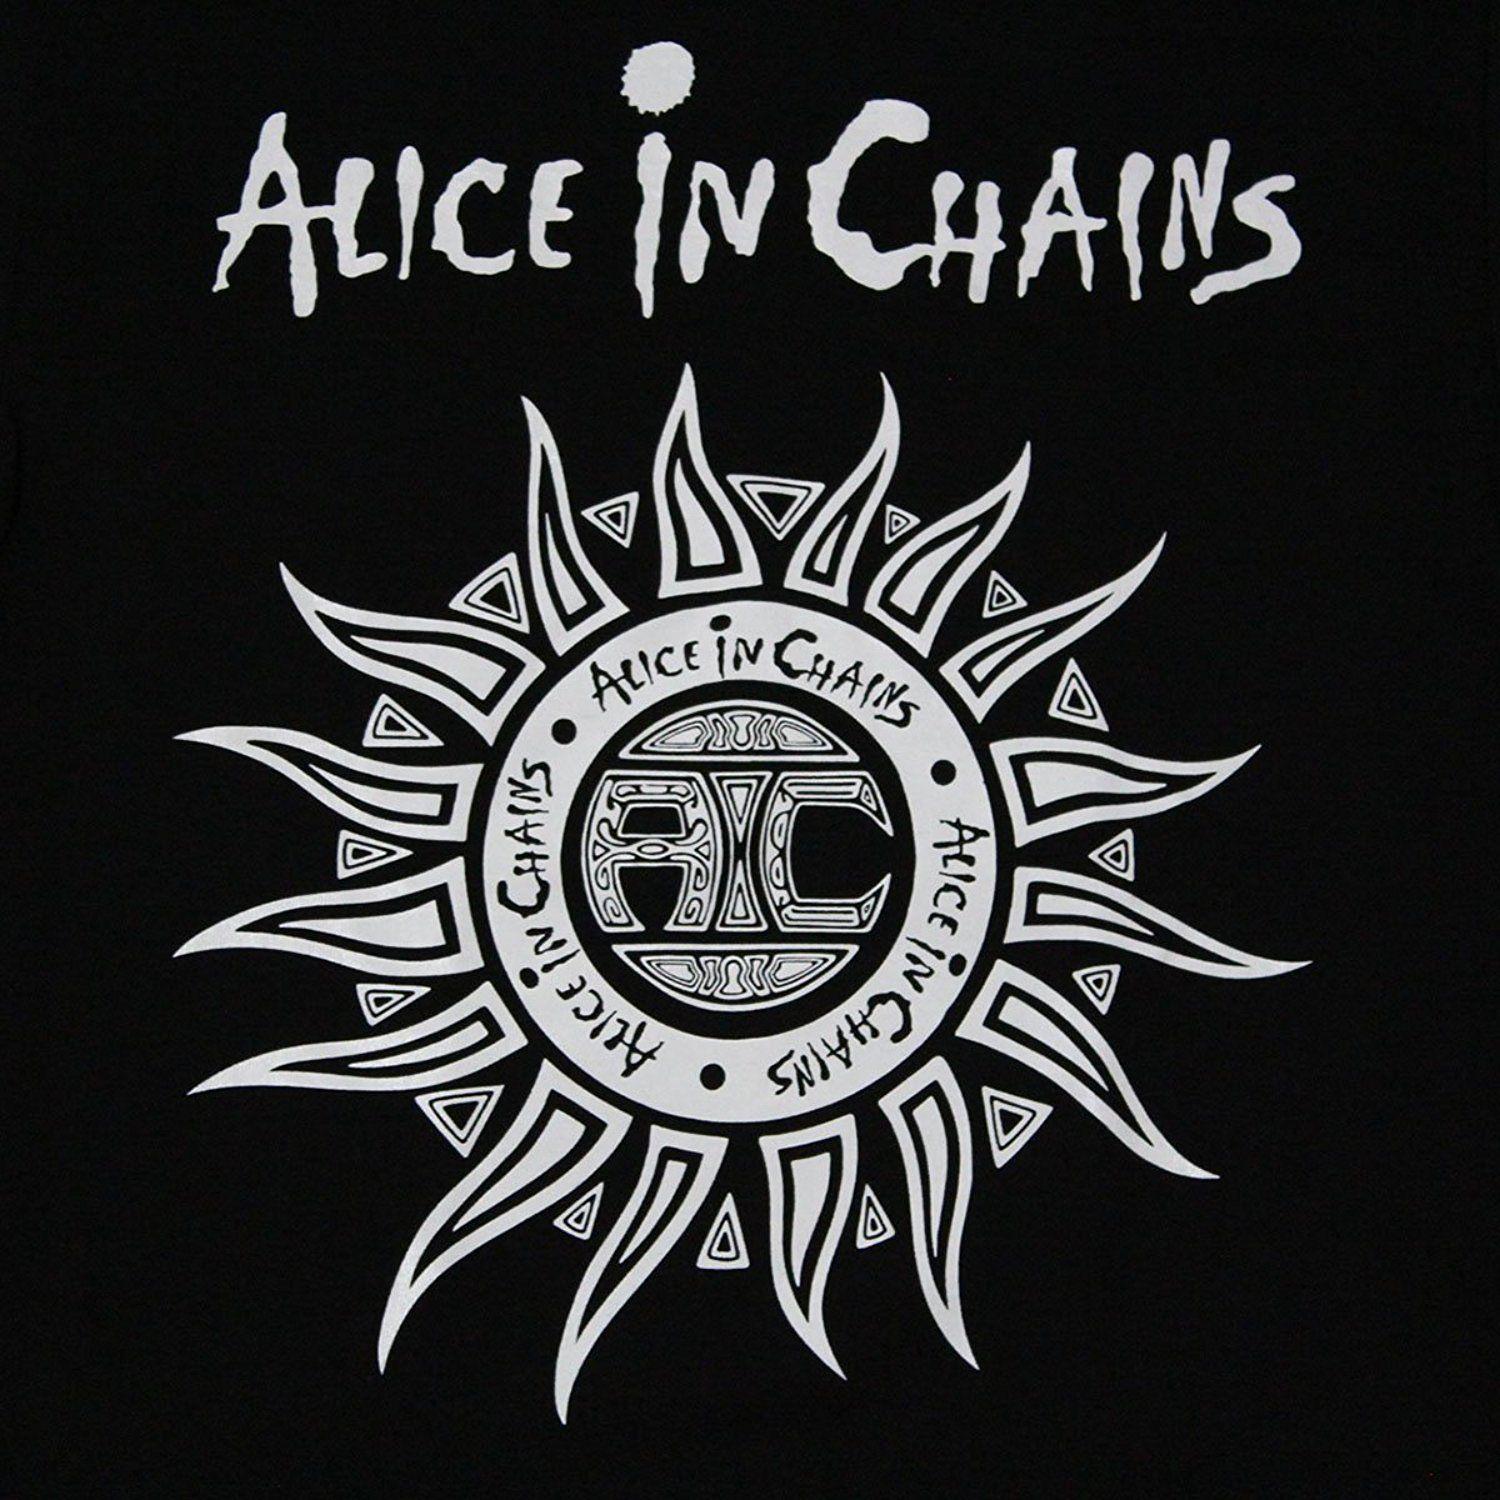 Alice in Chains Logo - Hip Hop Novelty T Shirts Men's Brand Clothing Alice In Chains Sun ...